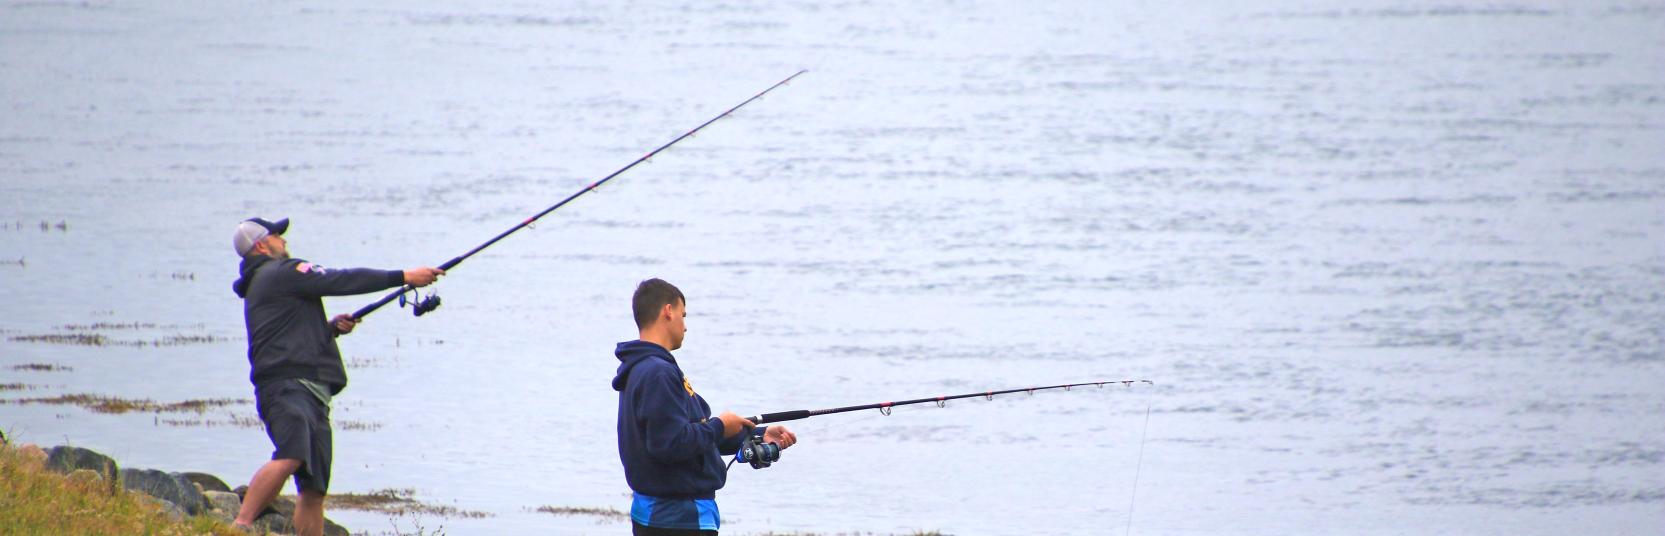 Best Spots for Fall Fishing on Cape Cod